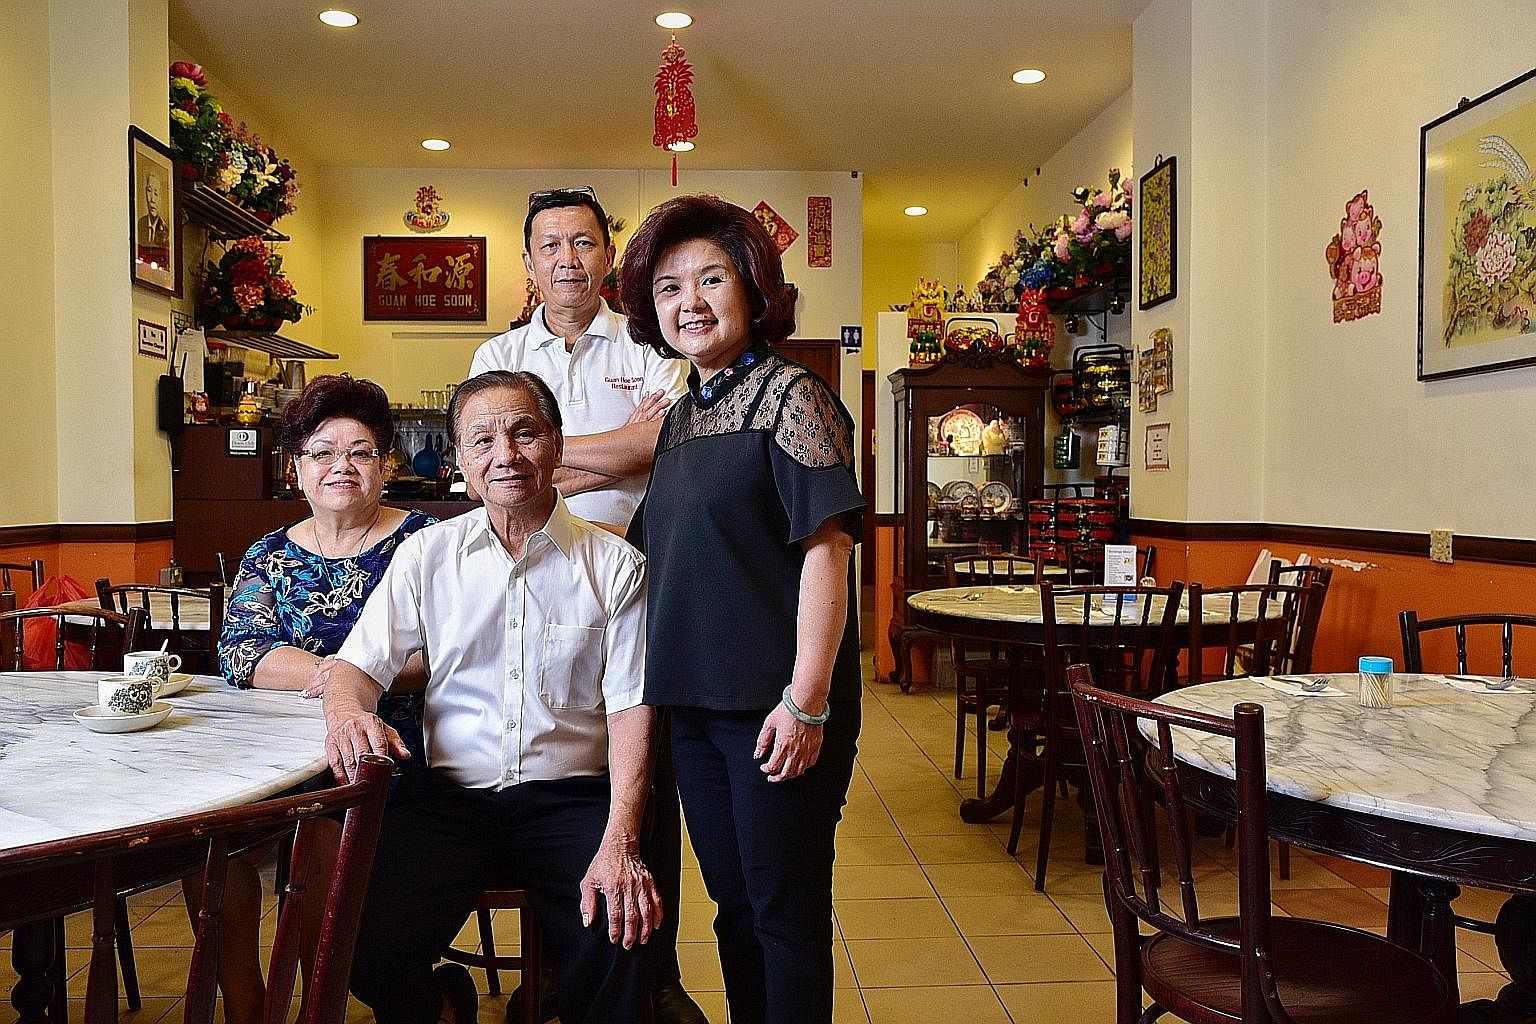 Guan Hoe Soon's third-generation owner Jenny Yap with her husband Raymond and parents Mr and Mrs Yap Kow Soon.